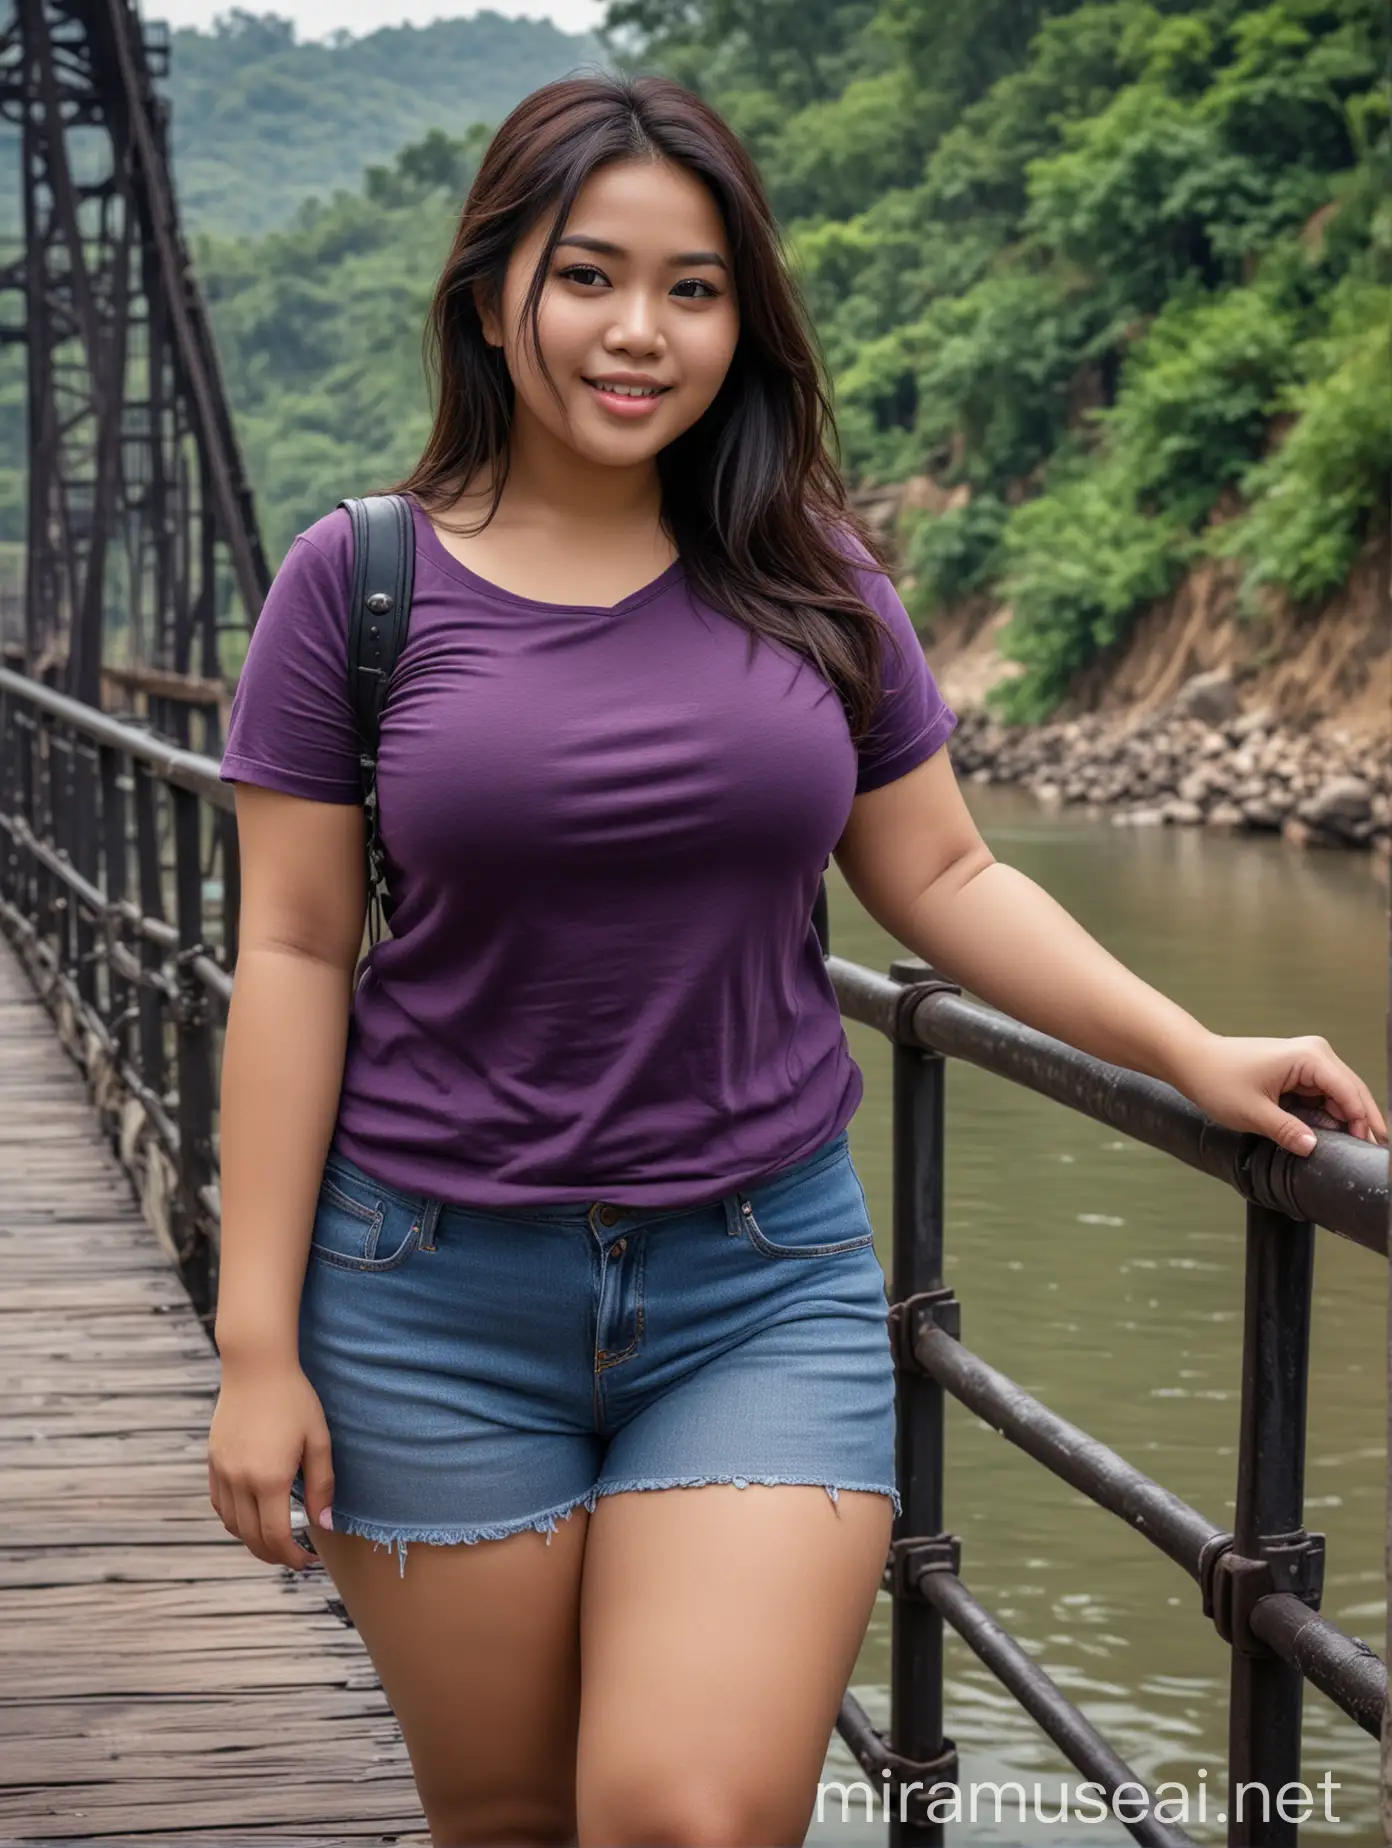 Charming Indonesian Woman with Soft Smile on Iron Bridge